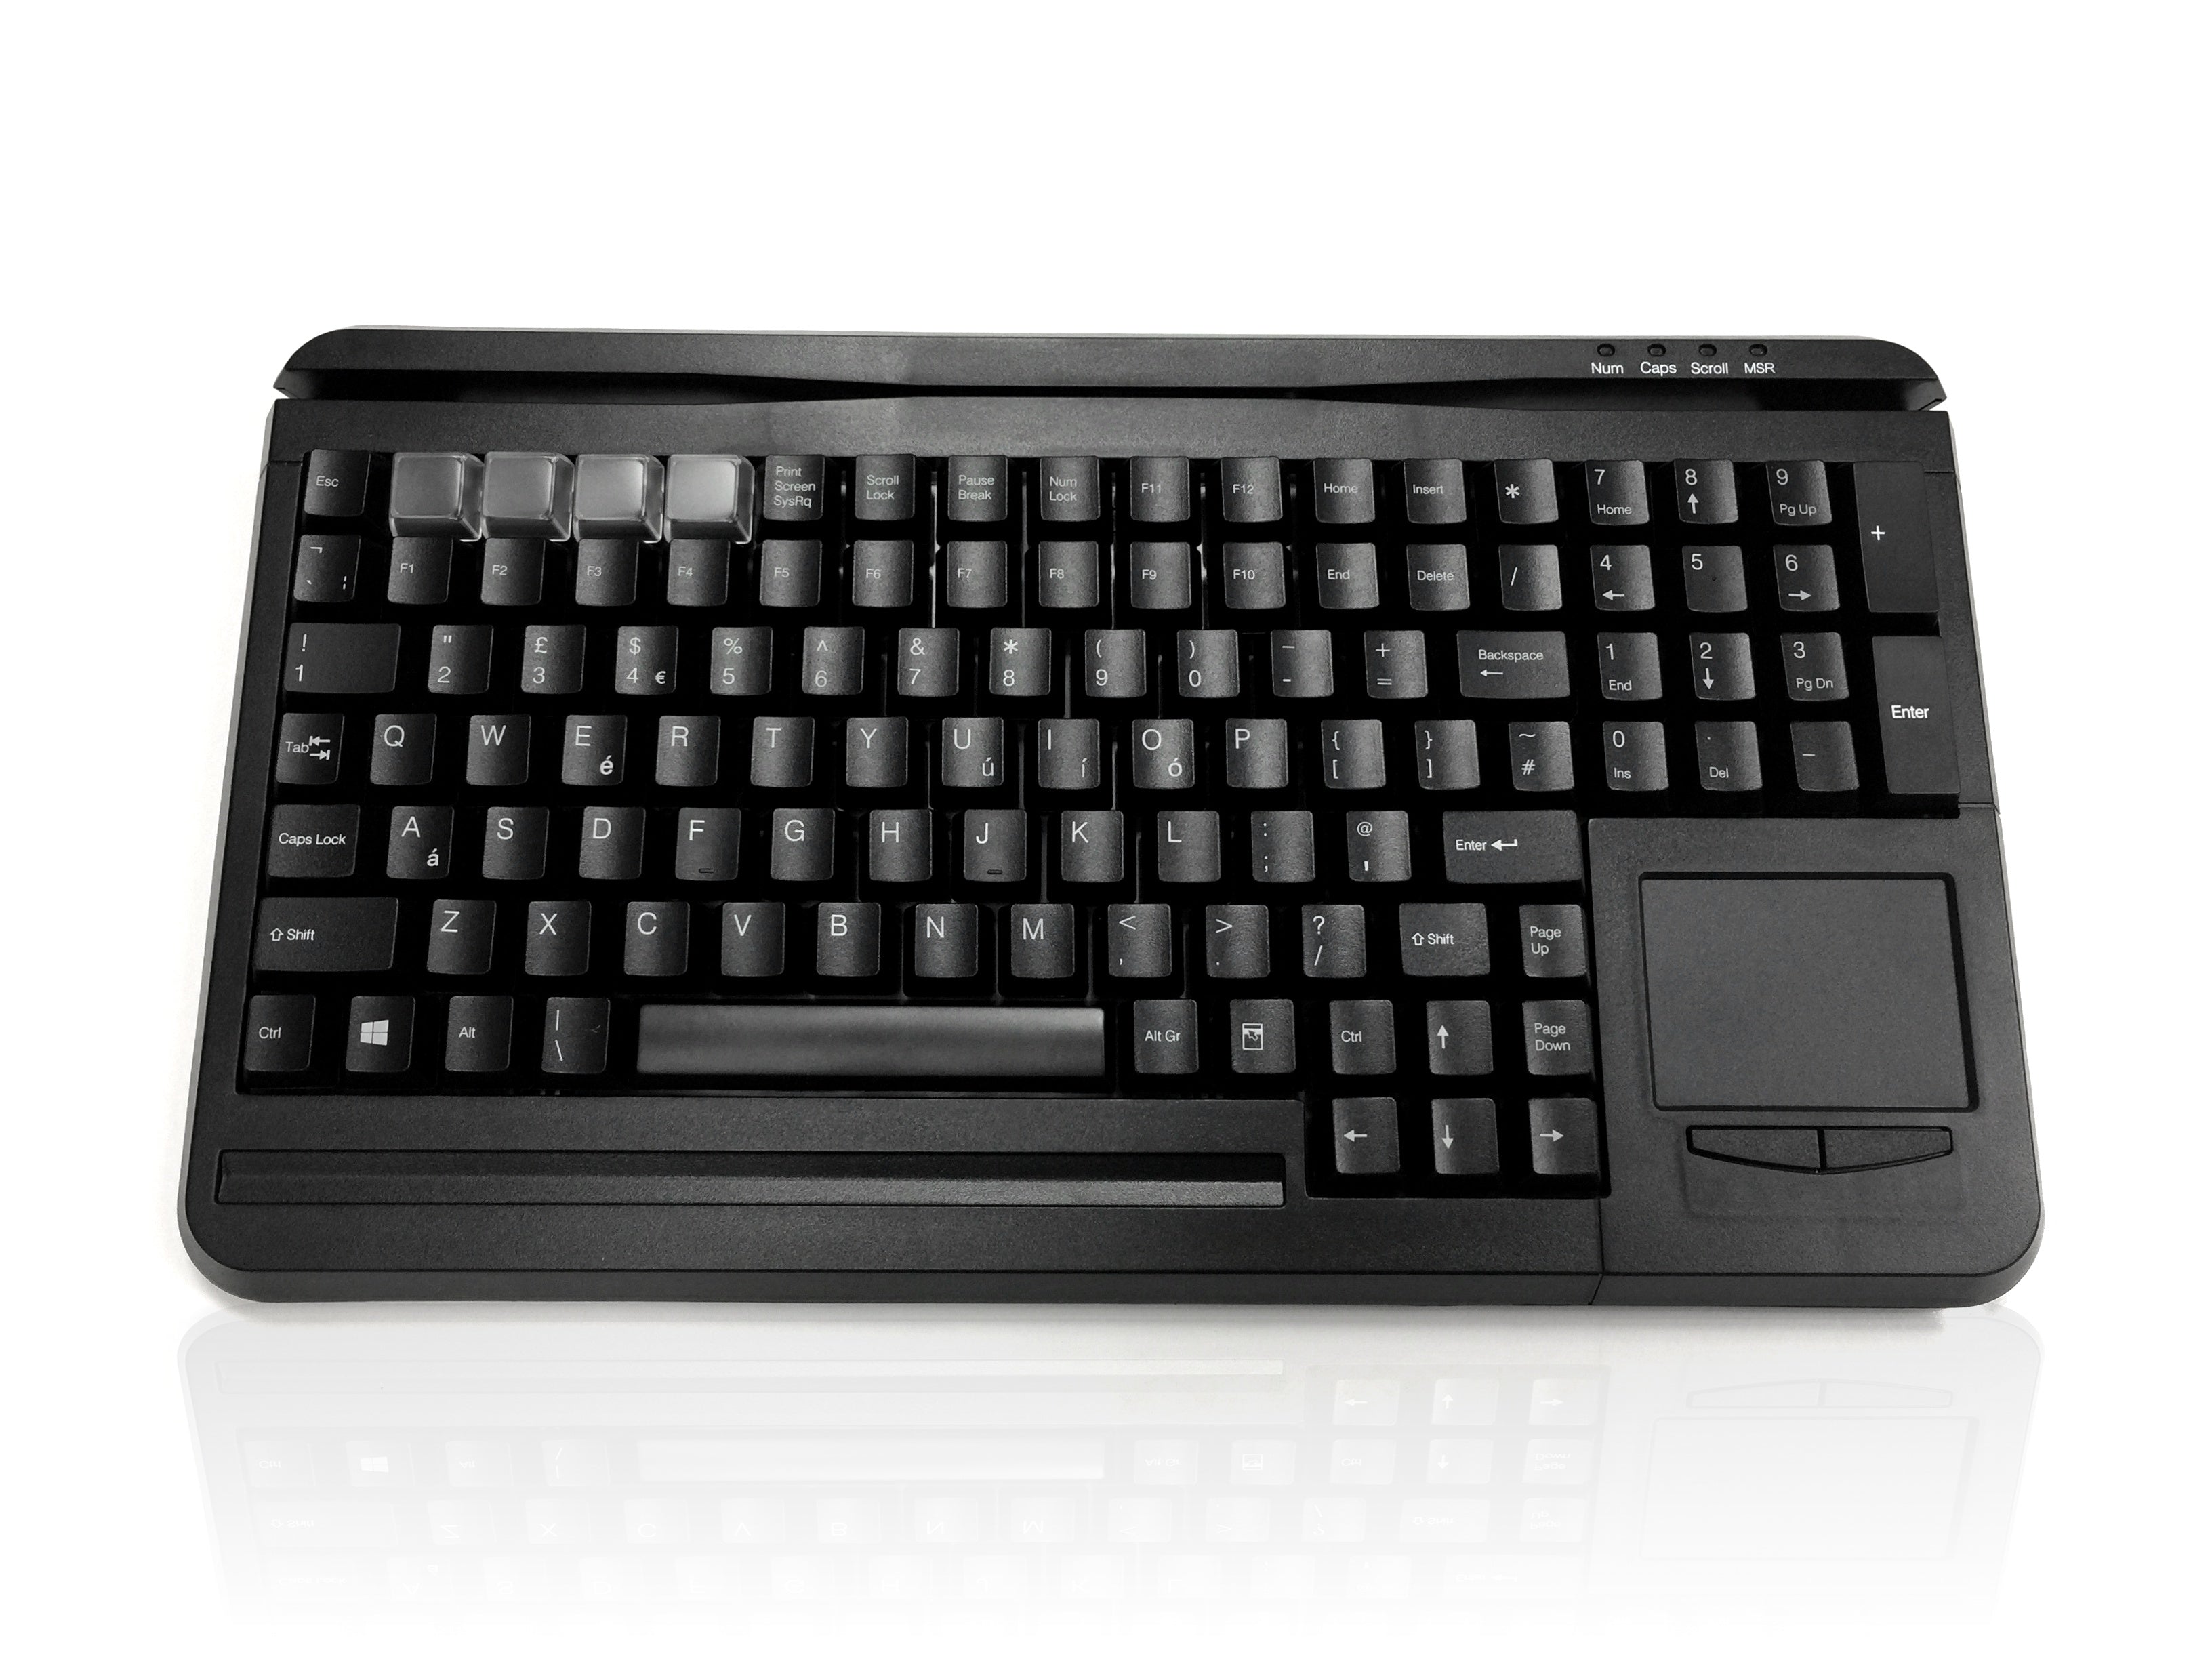 Accuratus S109C - USB Compact QWERTY & Programmable POS 109 Key Keyboard with MSR and Touchpad